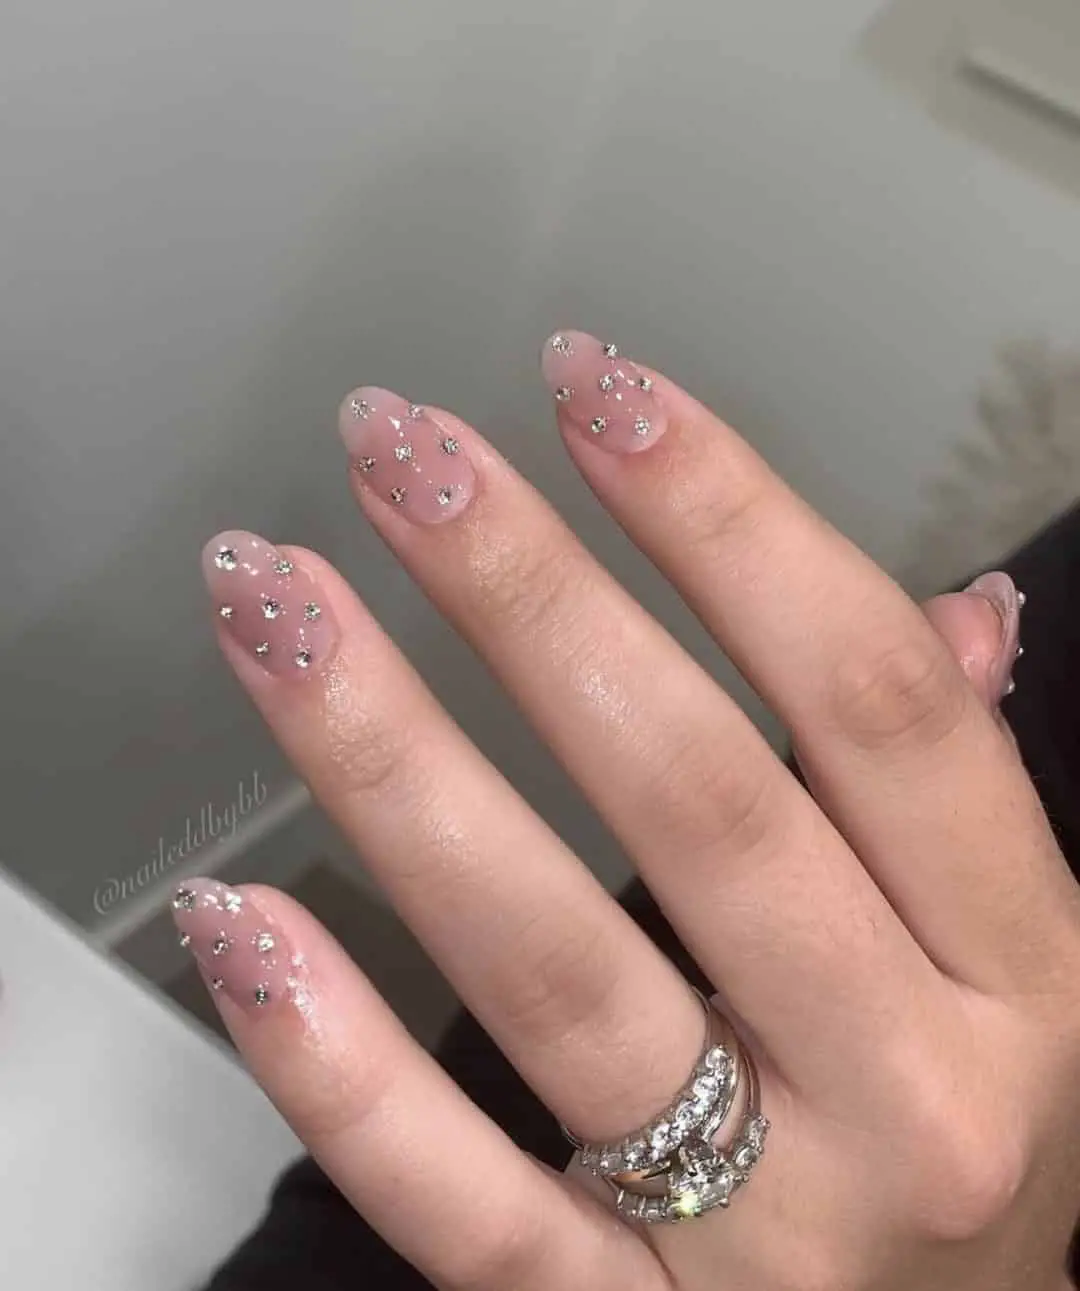 nails with diamonds